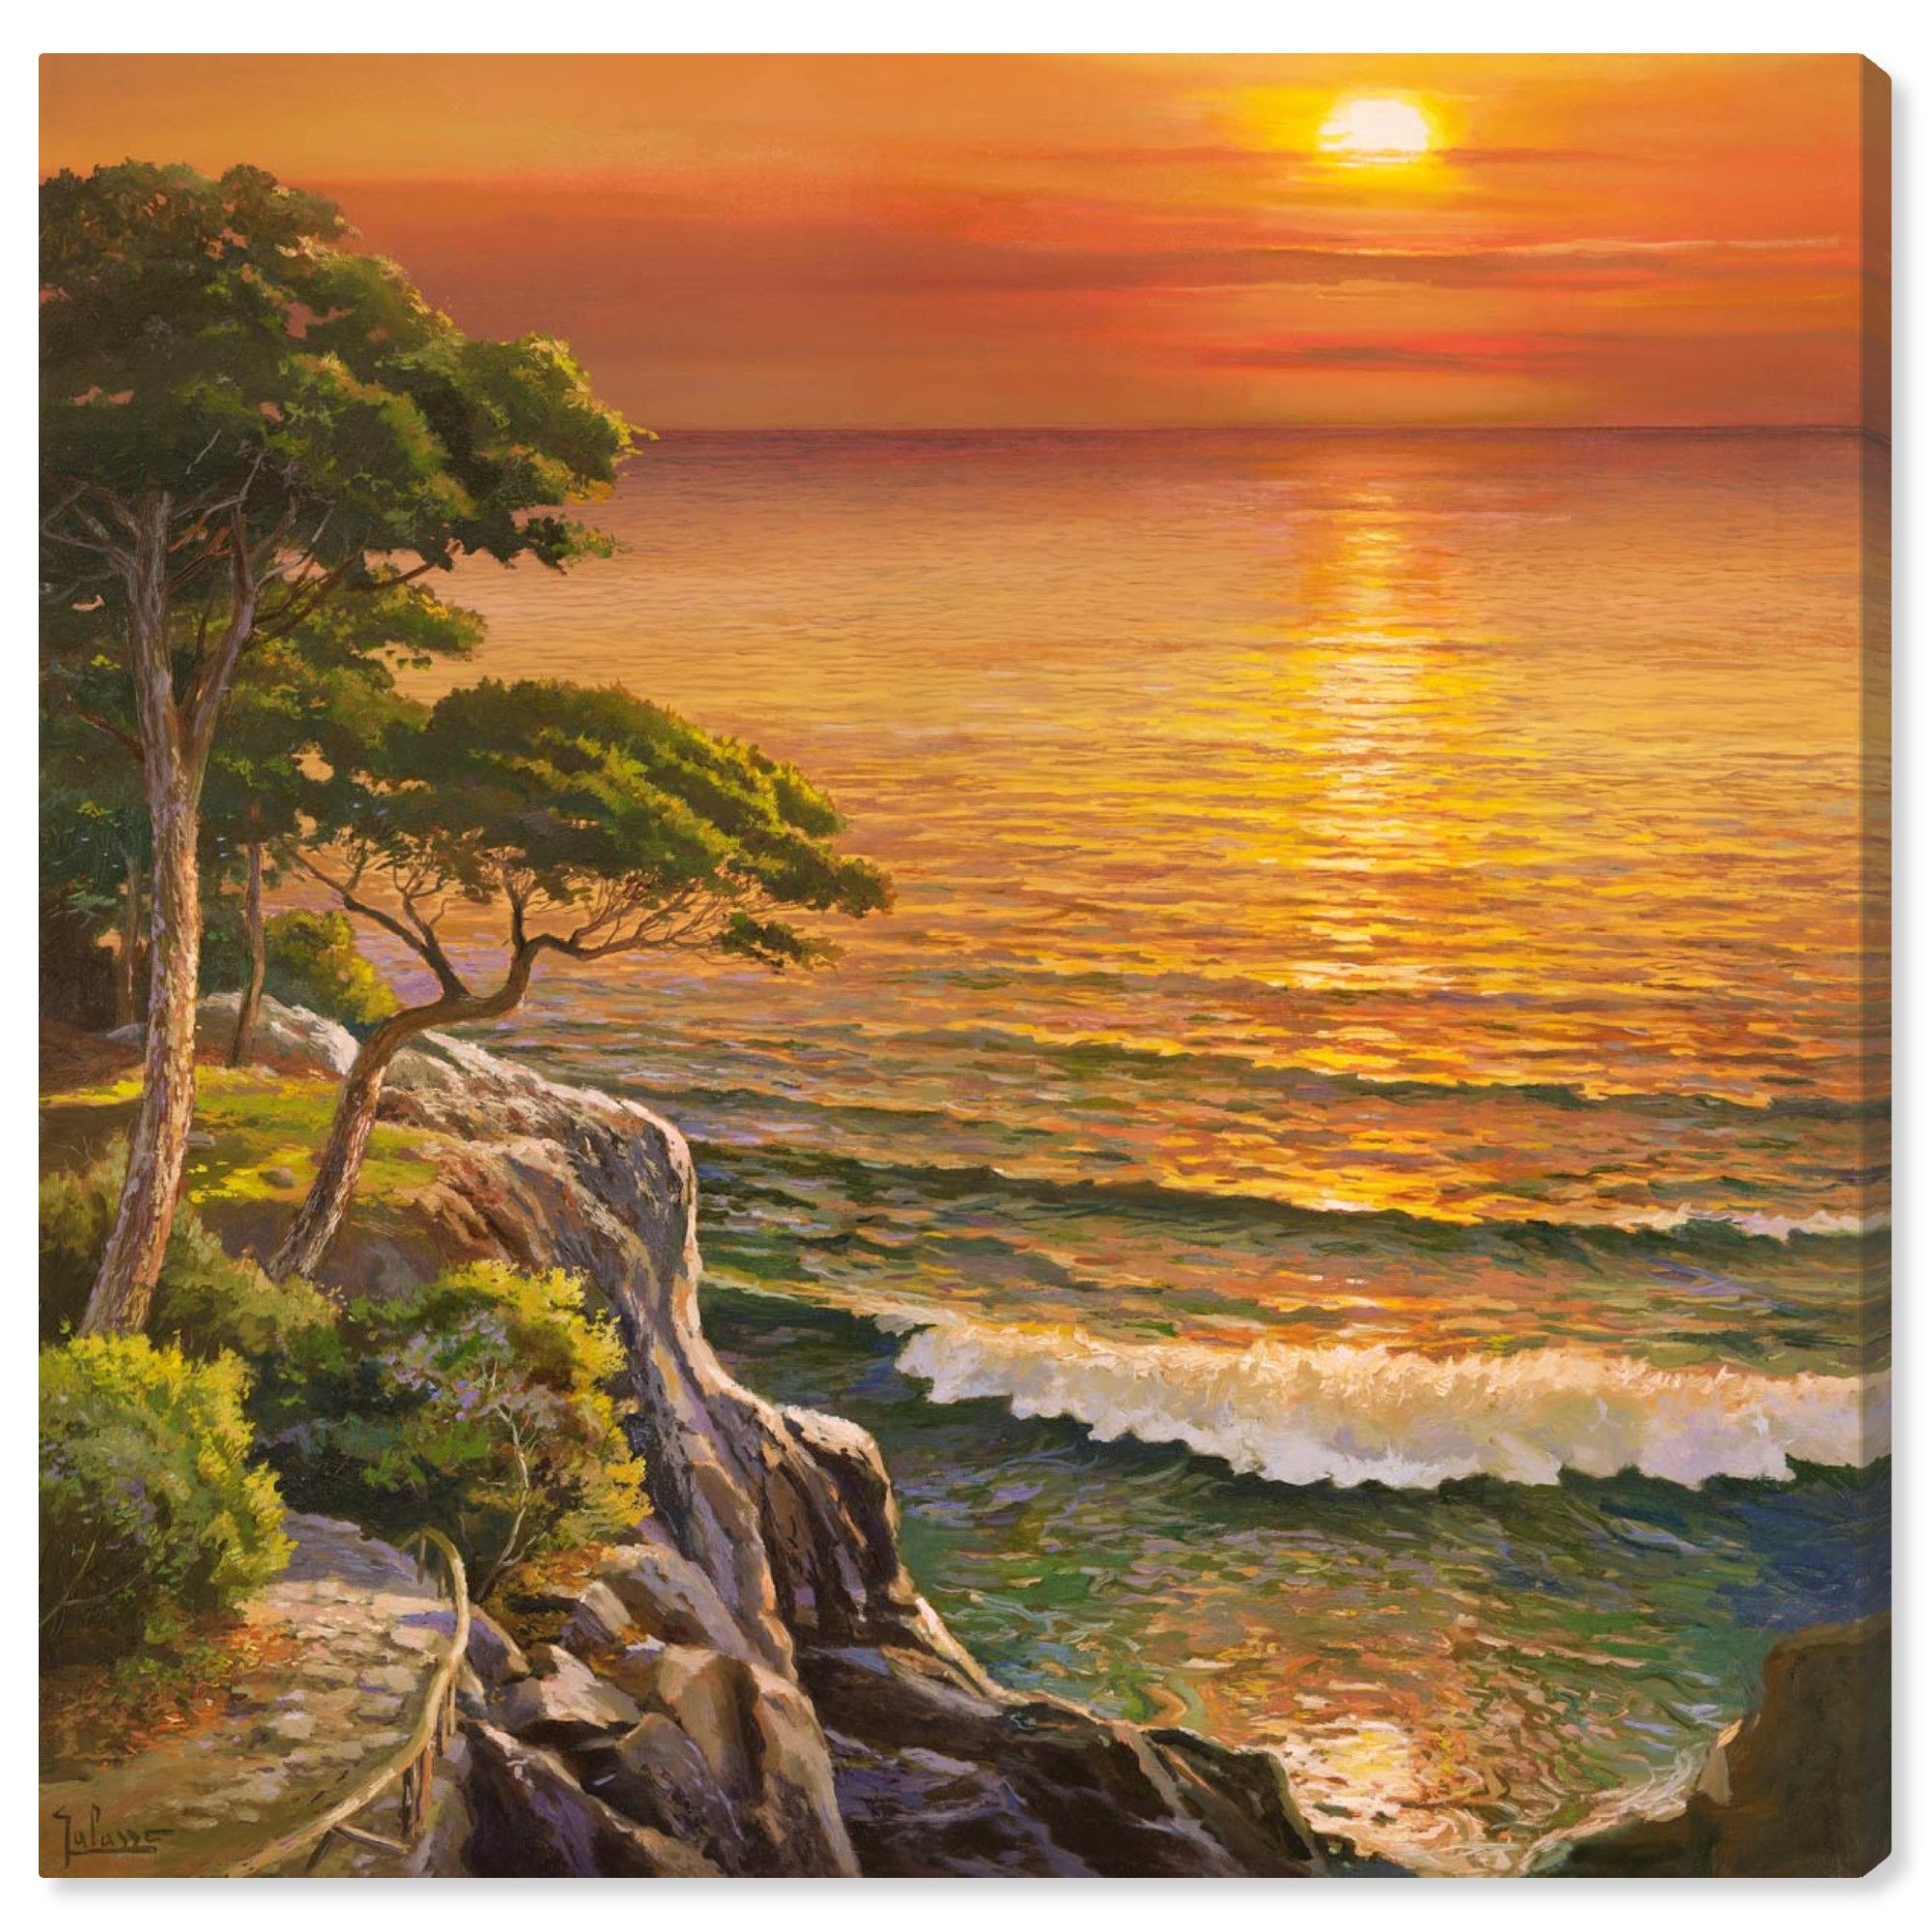 Runway Avenue Nature And Landscape Wall Art Canvas Prints 'sai – Sunset  Visage 1ad2552' Sunrise And Sunsets – Orange, Green – Walmart For Most Up To Date Sunset Landscape Wall Art (View 20 of 20)